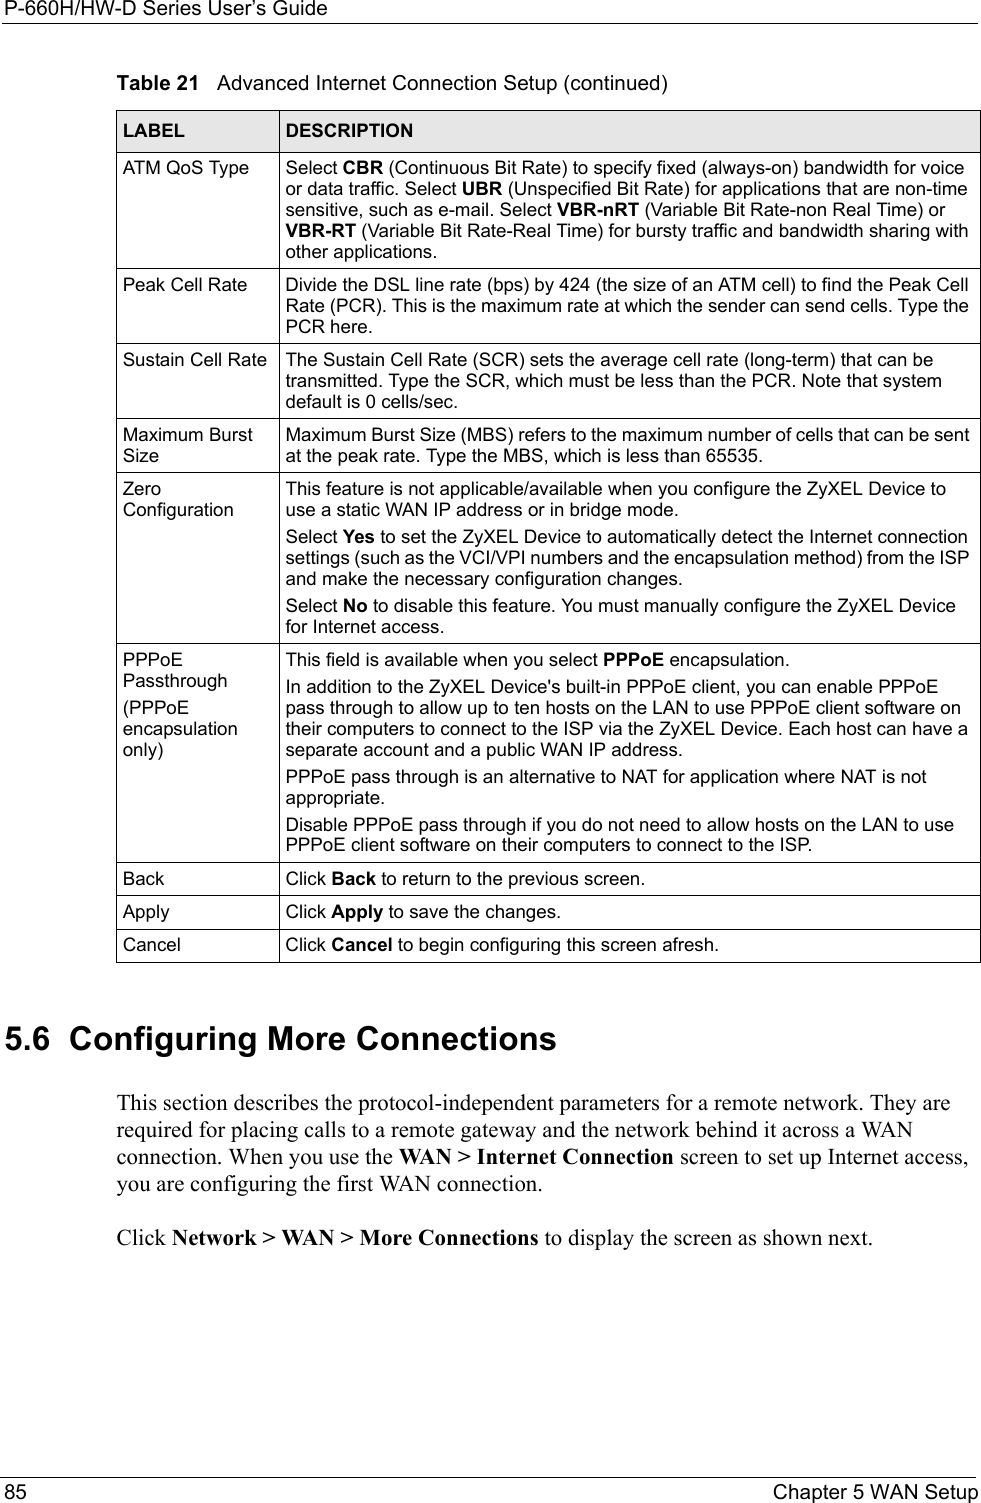 P-660H/HW-D Series User’s Guide85 Chapter 5 WAN Setup5.6  Configuring More ConnectionsThis section describes the protocol-independent parameters for a remote network. They are required for placing calls to a remote gateway and the network behind it across a WAN connection. When you use the WAN &gt; Internet Connection screen to set up Internet access, you are configuring the first WAN connection.Click Network &gt; WAN &gt; More Connections to display the screen as shown next.ATM QoS Type Select CBR (Continuous Bit Rate) to specify fixed (always-on) bandwidth for voice or data traffic. Select UBR (Unspecified Bit Rate) for applications that are non-time sensitive, such as e-mail. Select VBR-nRT (Variable Bit Rate-non Real Time) or VBR-RT (Variable Bit Rate-Real Time) for bursty traffic and bandwidth sharing with other applications. Peak Cell Rate Divide the DSL line rate (bps) by 424 (the size of an ATM cell) to find the Peak Cell Rate (PCR). This is the maximum rate at which the sender can send cells. Type the PCR here.Sustain Cell Rate The Sustain Cell Rate (SCR) sets the average cell rate (long-term) that can be transmitted. Type the SCR, which must be less than the PCR. Note that system default is 0 cells/sec. Maximum Burst SizeMaximum Burst Size (MBS) refers to the maximum number of cells that can be sent at the peak rate. Type the MBS, which is less than 65535. Zero ConfigurationThis feature is not applicable/available when you configure the ZyXEL Device to use a static WAN IP address or in bridge mode. Select Yes to set the ZyXEL Device to automatically detect the Internet connection settings (such as the VCI/VPI numbers and the encapsulation method) from the ISP and make the necessary configuration changes.Select No to disable this feature. You must manually configure the ZyXEL Device for Internet access. PPPoE Passthrough(PPPoE encapsulation only)This field is available when you select PPPoE encapsulation. In addition to the ZyXEL Device&apos;s built-in PPPoE client, you can enable PPPoE pass through to allow up to ten hosts on the LAN to use PPPoE client software on their computers to connect to the ISP via the ZyXEL Device. Each host can have a separate account and a public WAN IP address. PPPoE pass through is an alternative to NAT for application where NAT is not appropriate.Disable PPPoE pass through if you do not need to allow hosts on the LAN to use PPPoE client software on their computers to connect to the ISP.Back Click Back to return to the previous screen.Apply Click Apply to save the changes. Cancel Click Cancel to begin configuring this screen afresh.Table 21   Advanced Internet Connection Setup (continued)LABEL DESCRIPTION